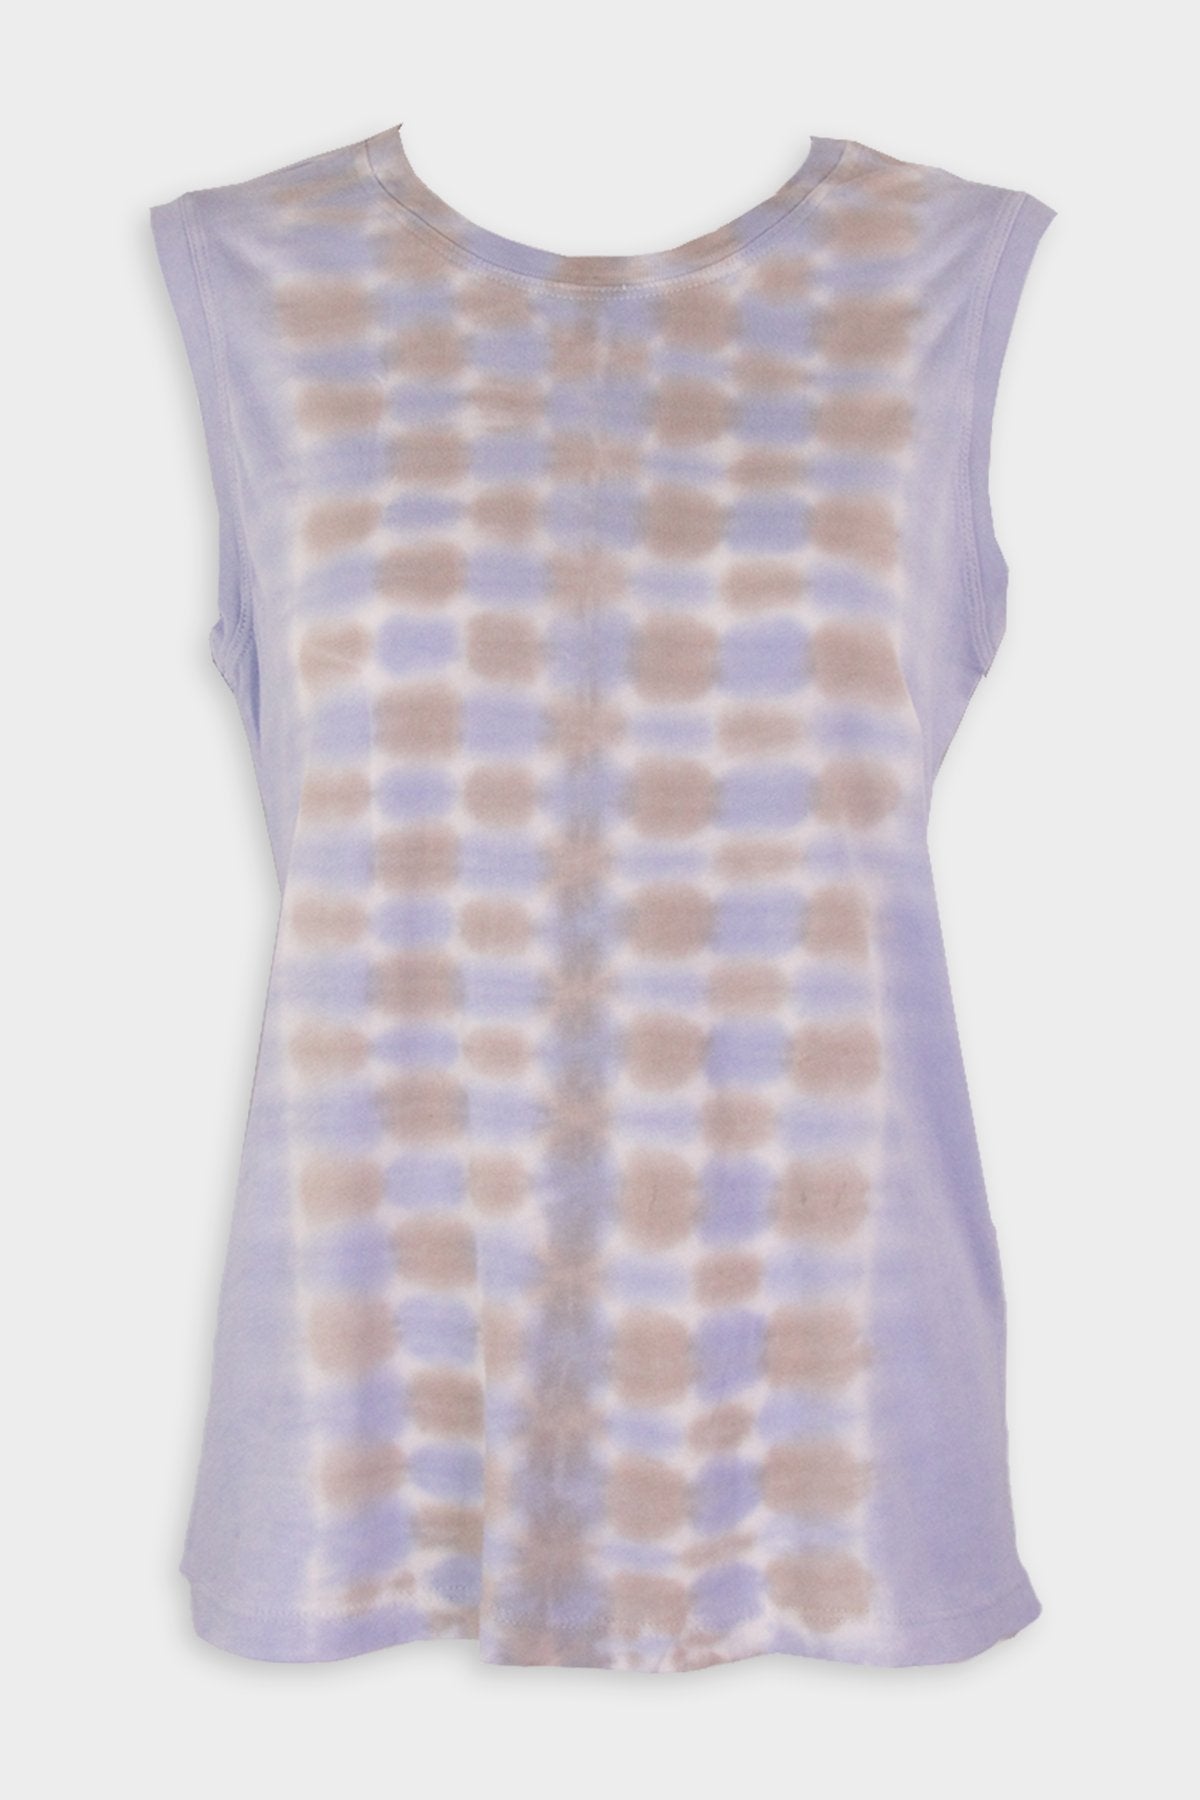 Fitted Muscle Tee in Taupe/Sky - shop-olivia.com